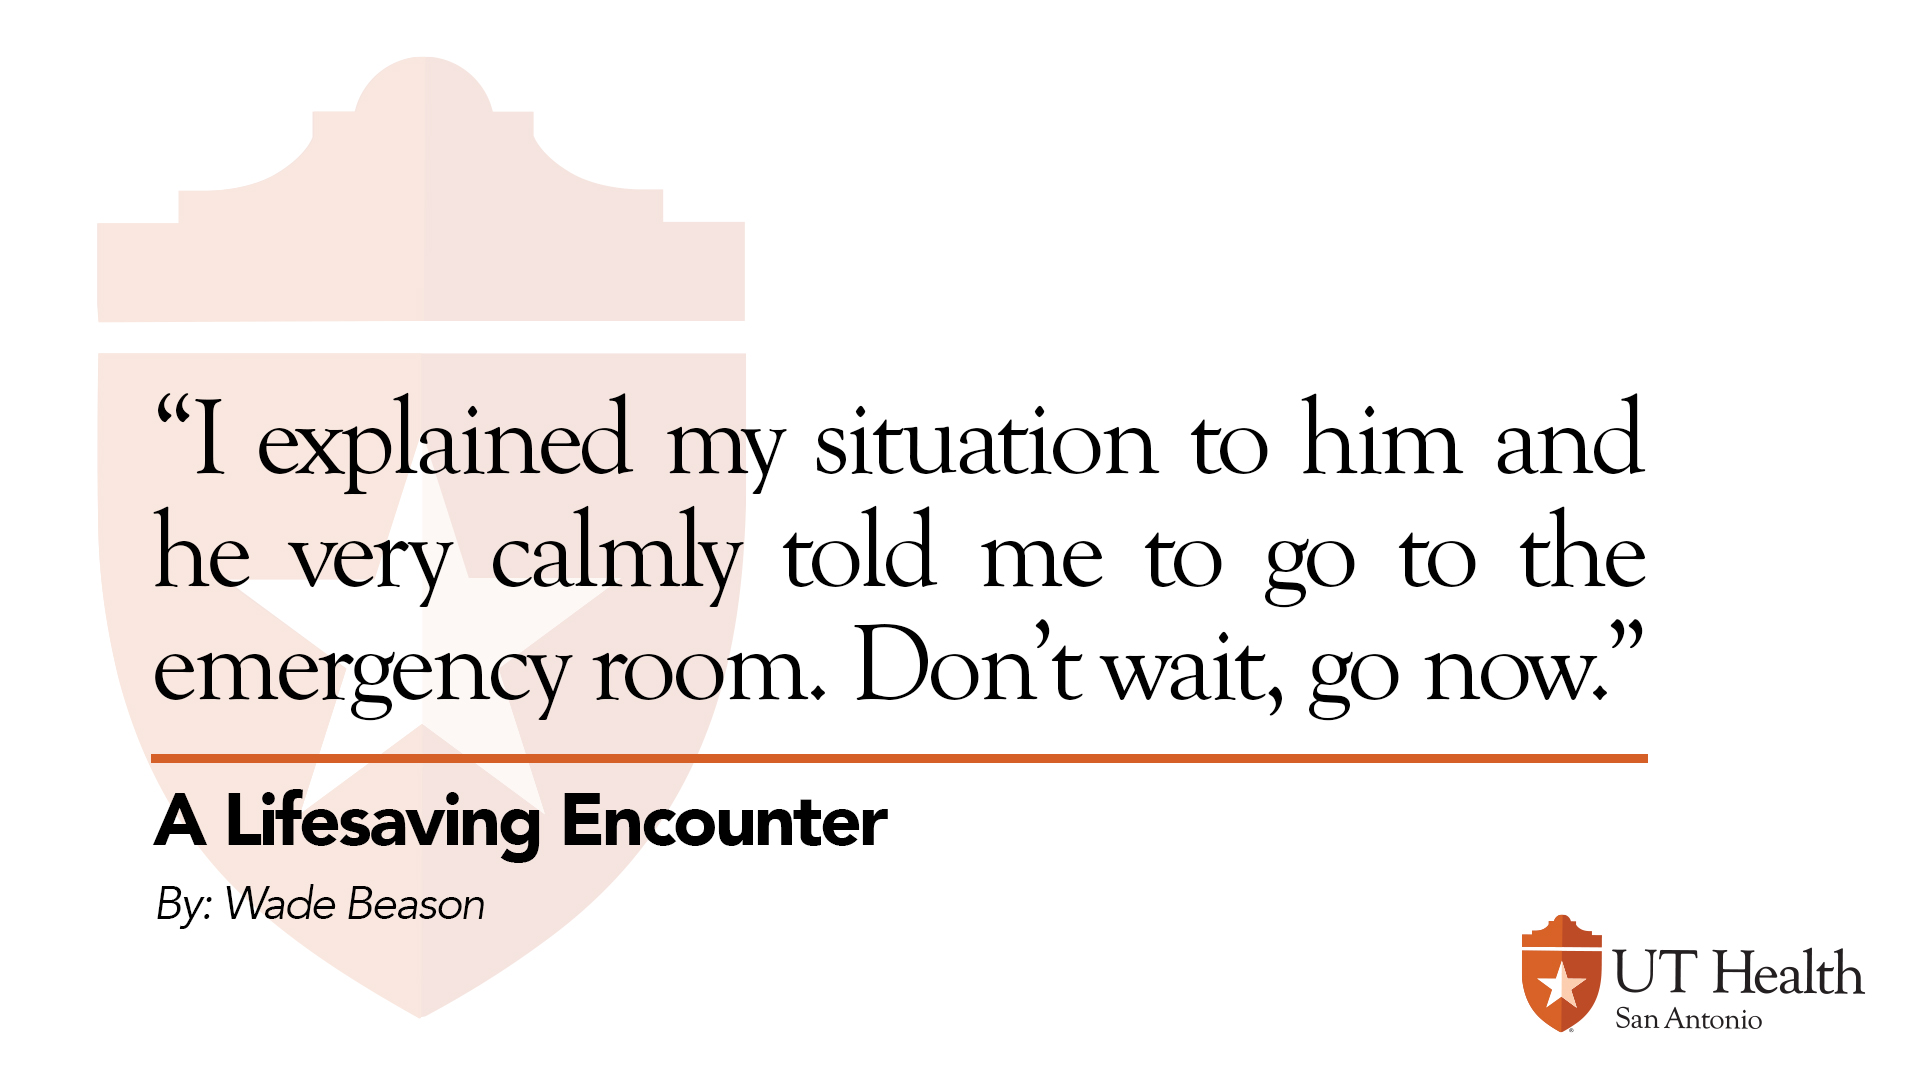 Image with quote from the article: “I explained my situation to him and he very calmly told me to go to the emergency room. Don’t wait, go now,”